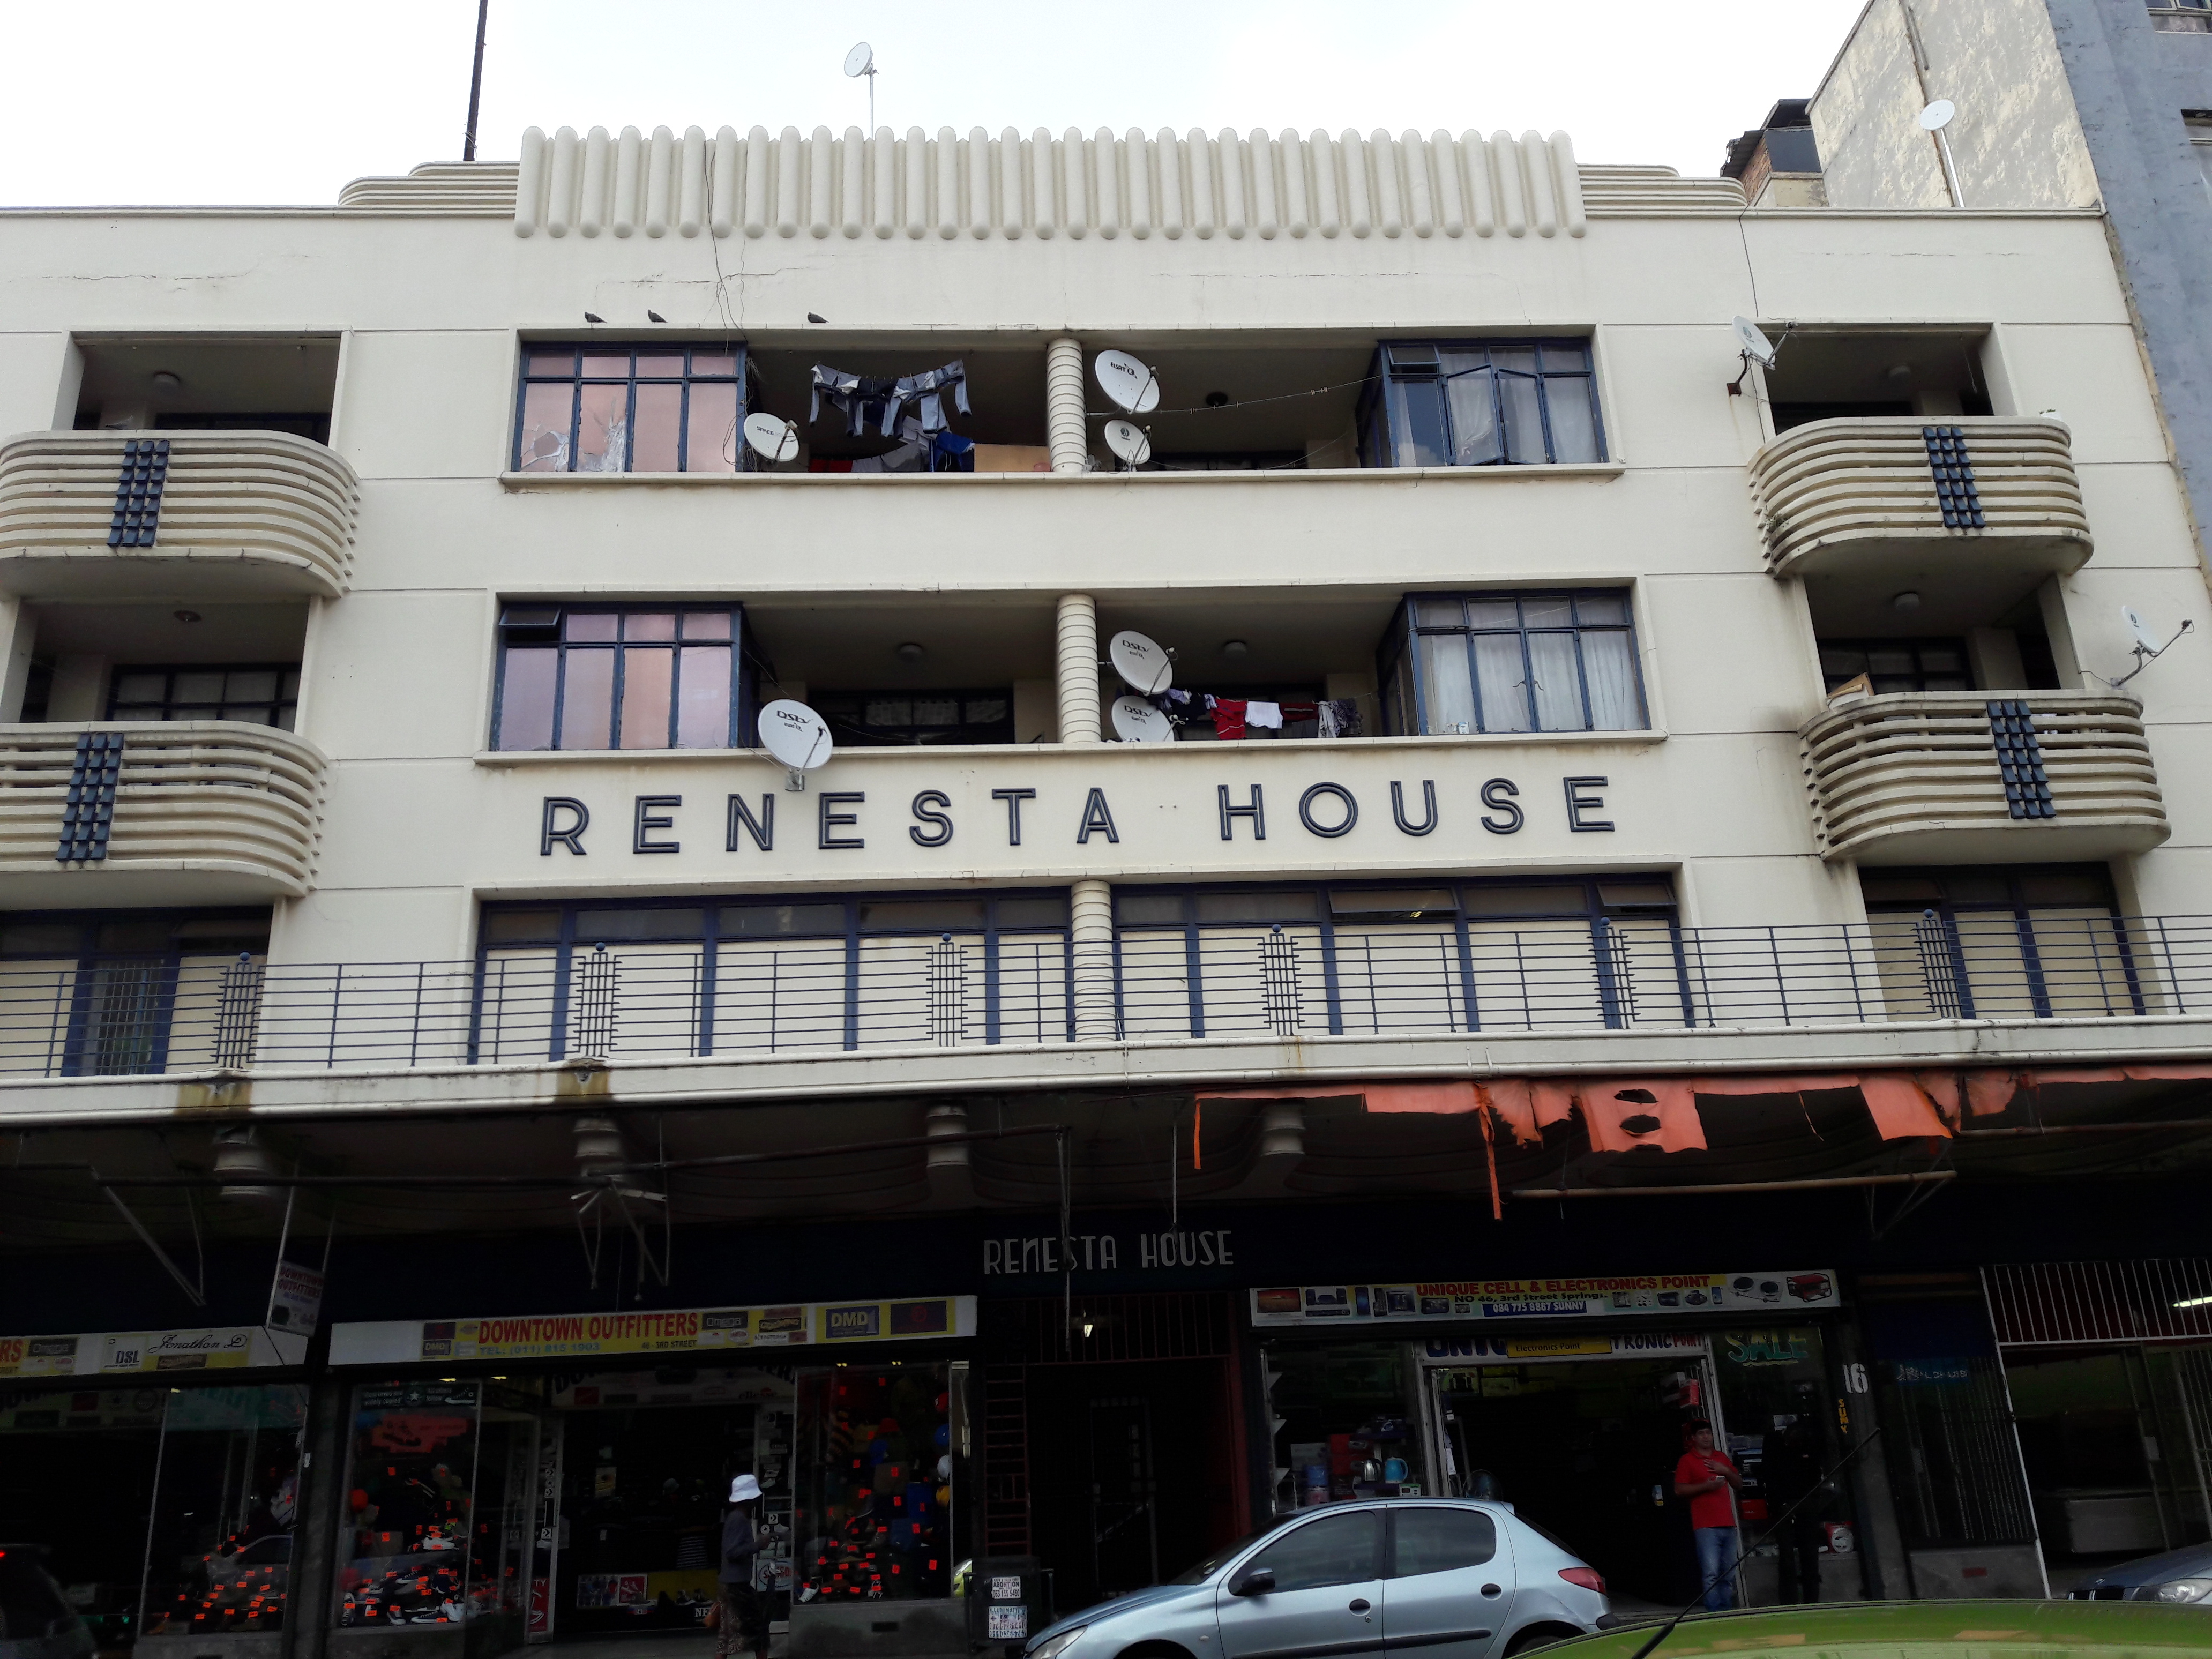 Façade of Renesta House, across the road Nazeem has his fast food outlet. Image: Barbara Adair and Sreddy Yen